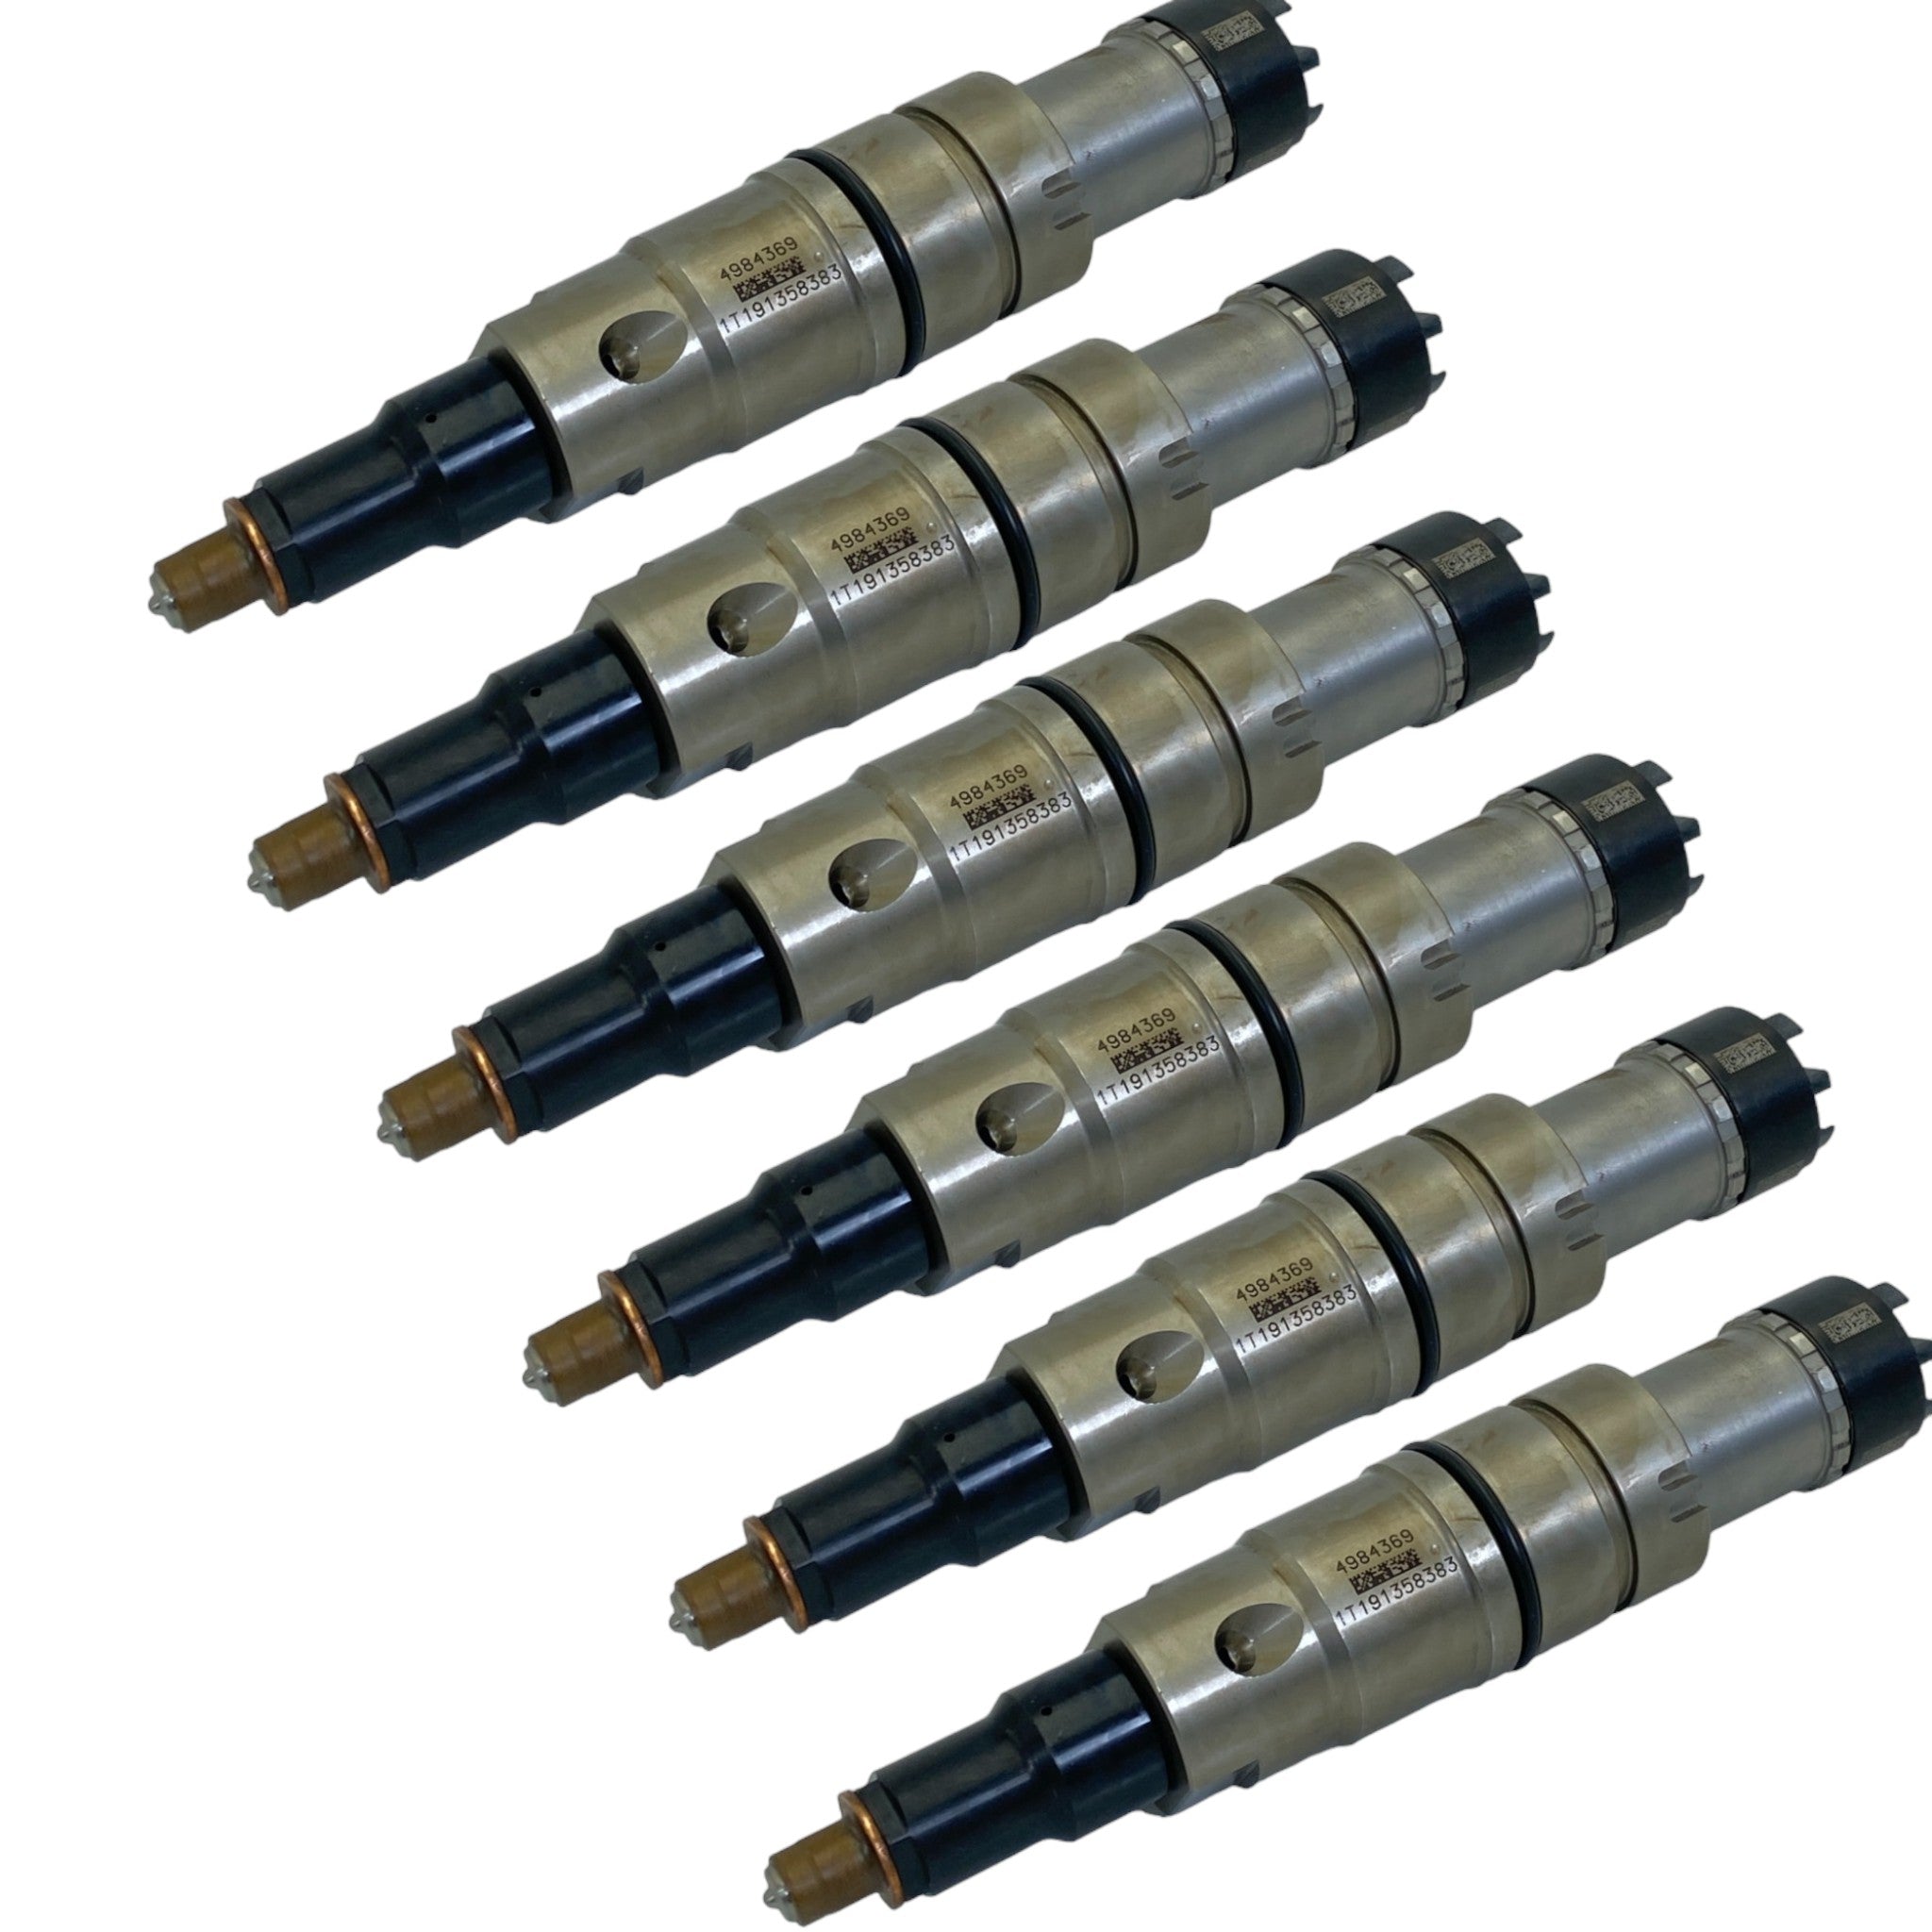 2897320 Genuine Cummins Fuel Injectors Set Of Six For Xpi Fuel Systems On Epa13 15L Isx/Qsx Engines